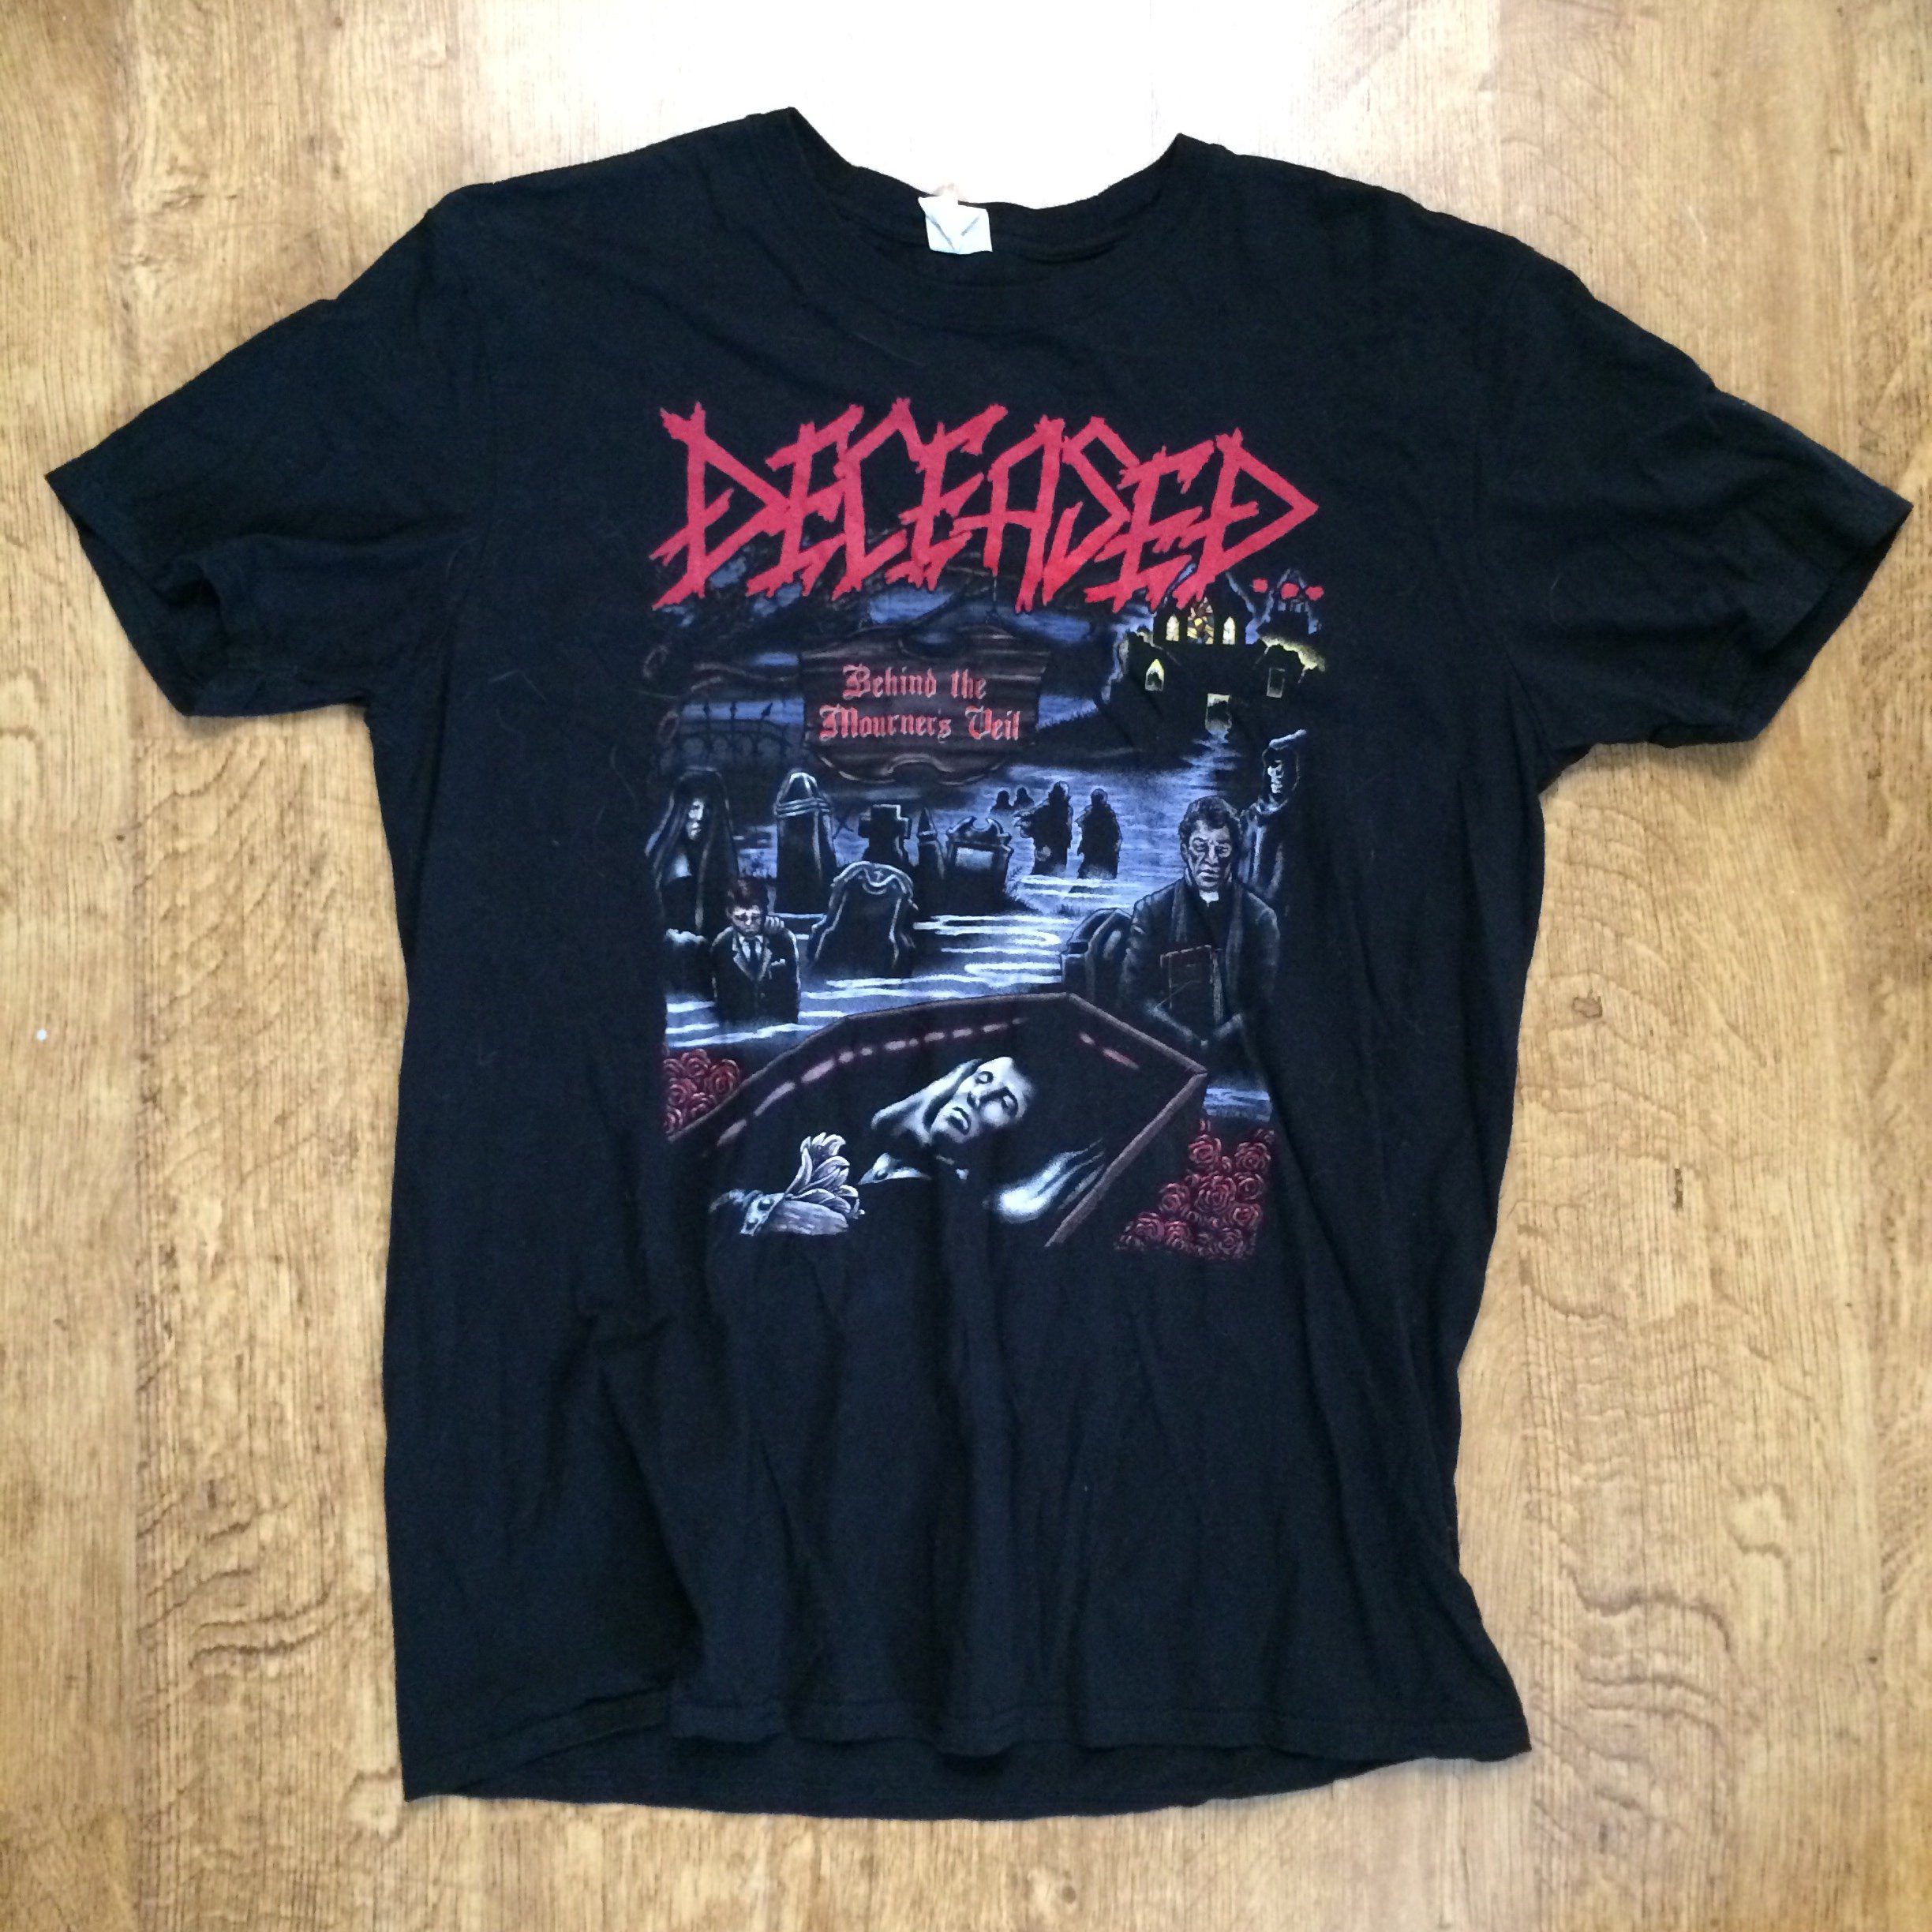 Photo of the Deceased - "Behind the Mourner's Veil" T-shirt (Black)